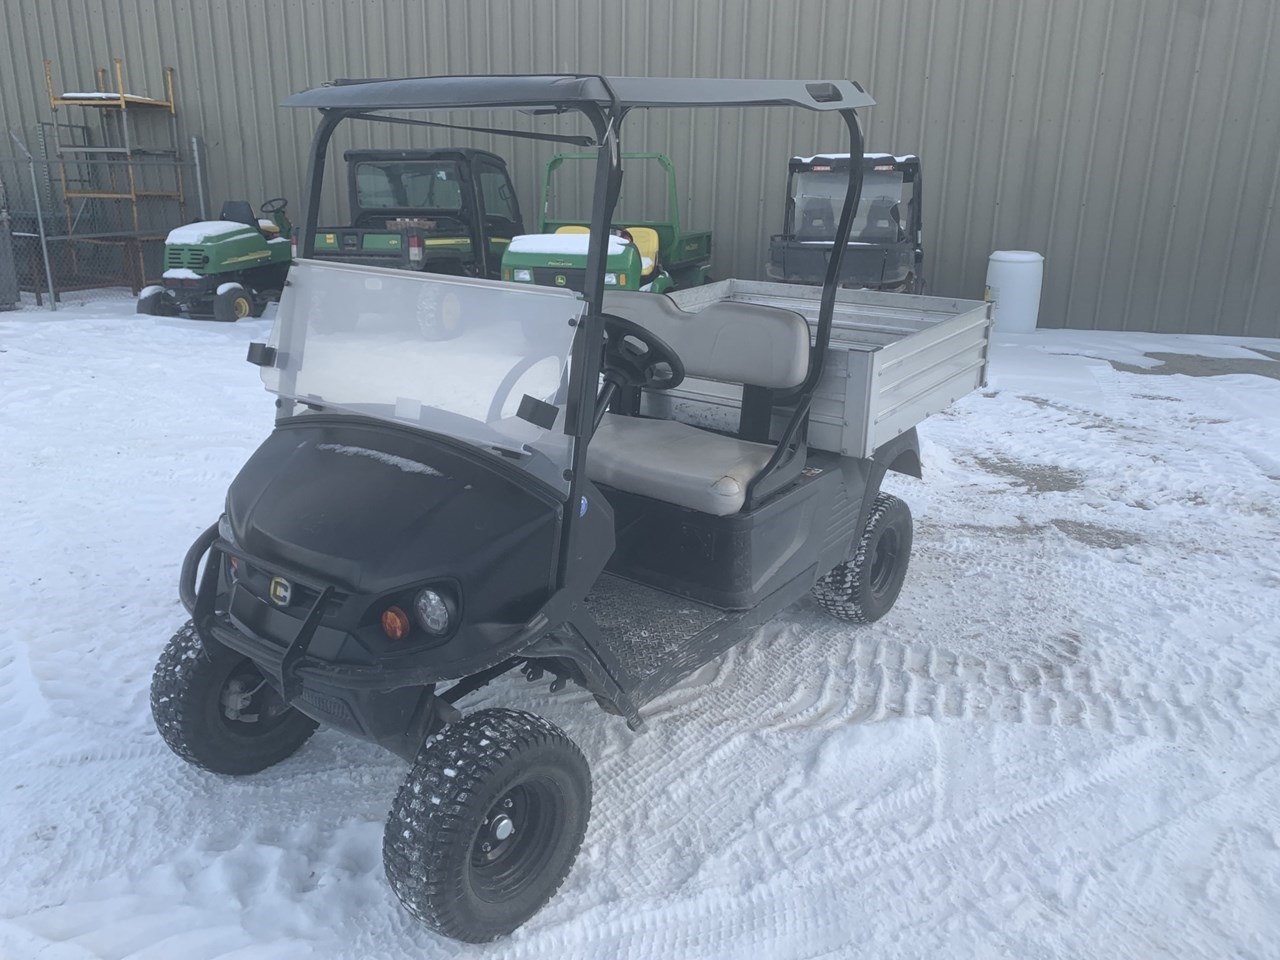 2017 Cushman HAULER PRO X ELECTRIC Utility Vehicle For Sale in Miller